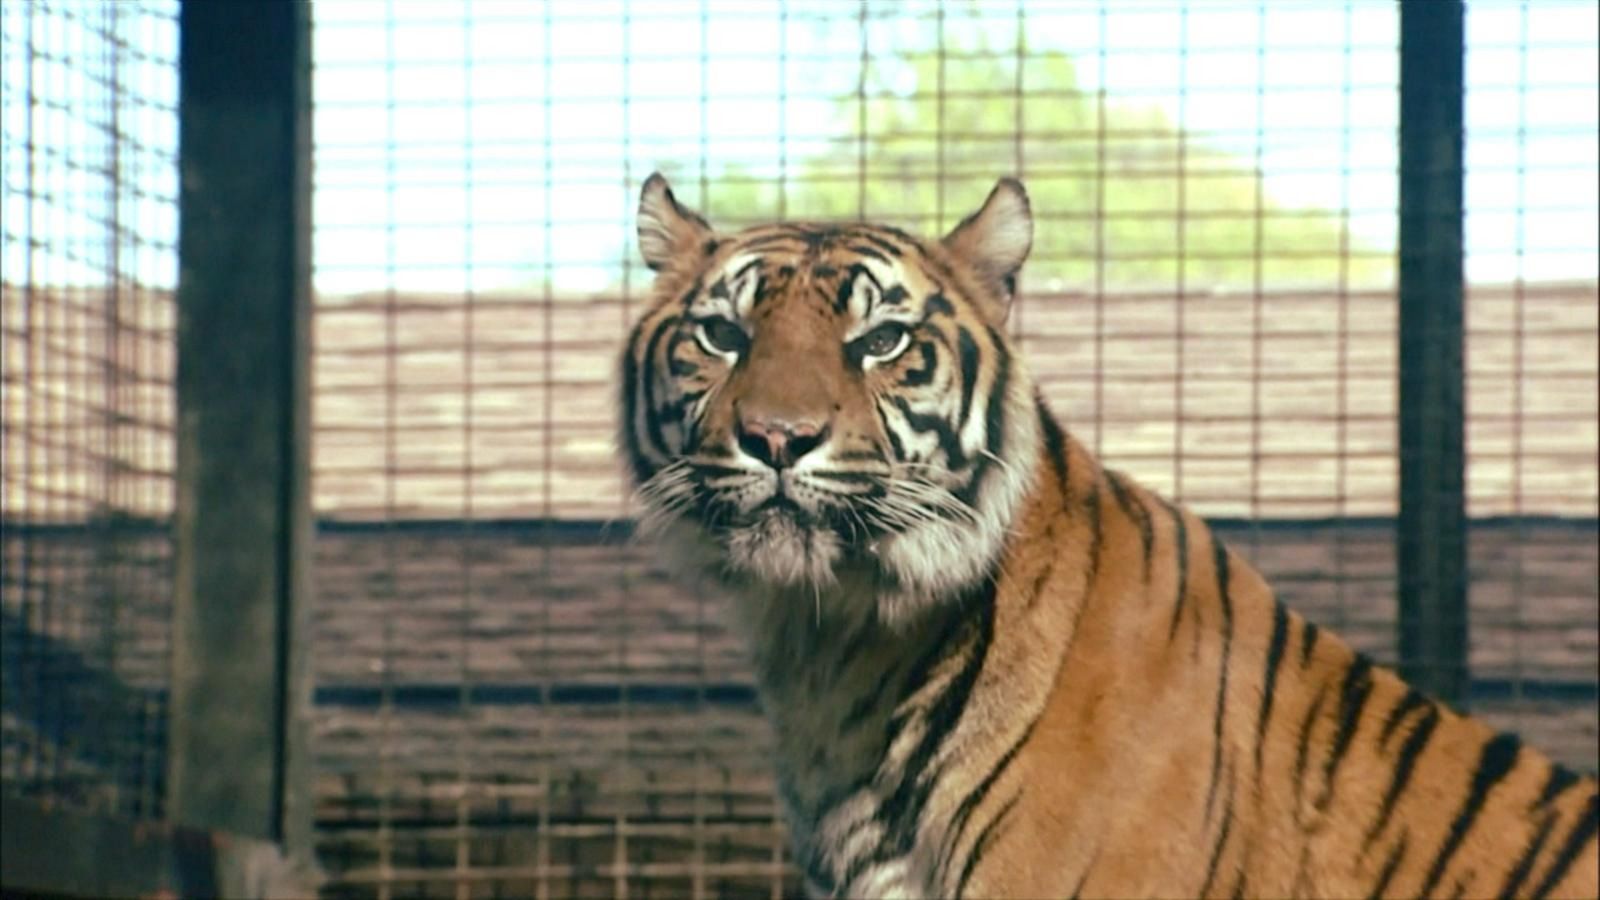 Zoo worker hospitalized after tiger attack - Good Morning America